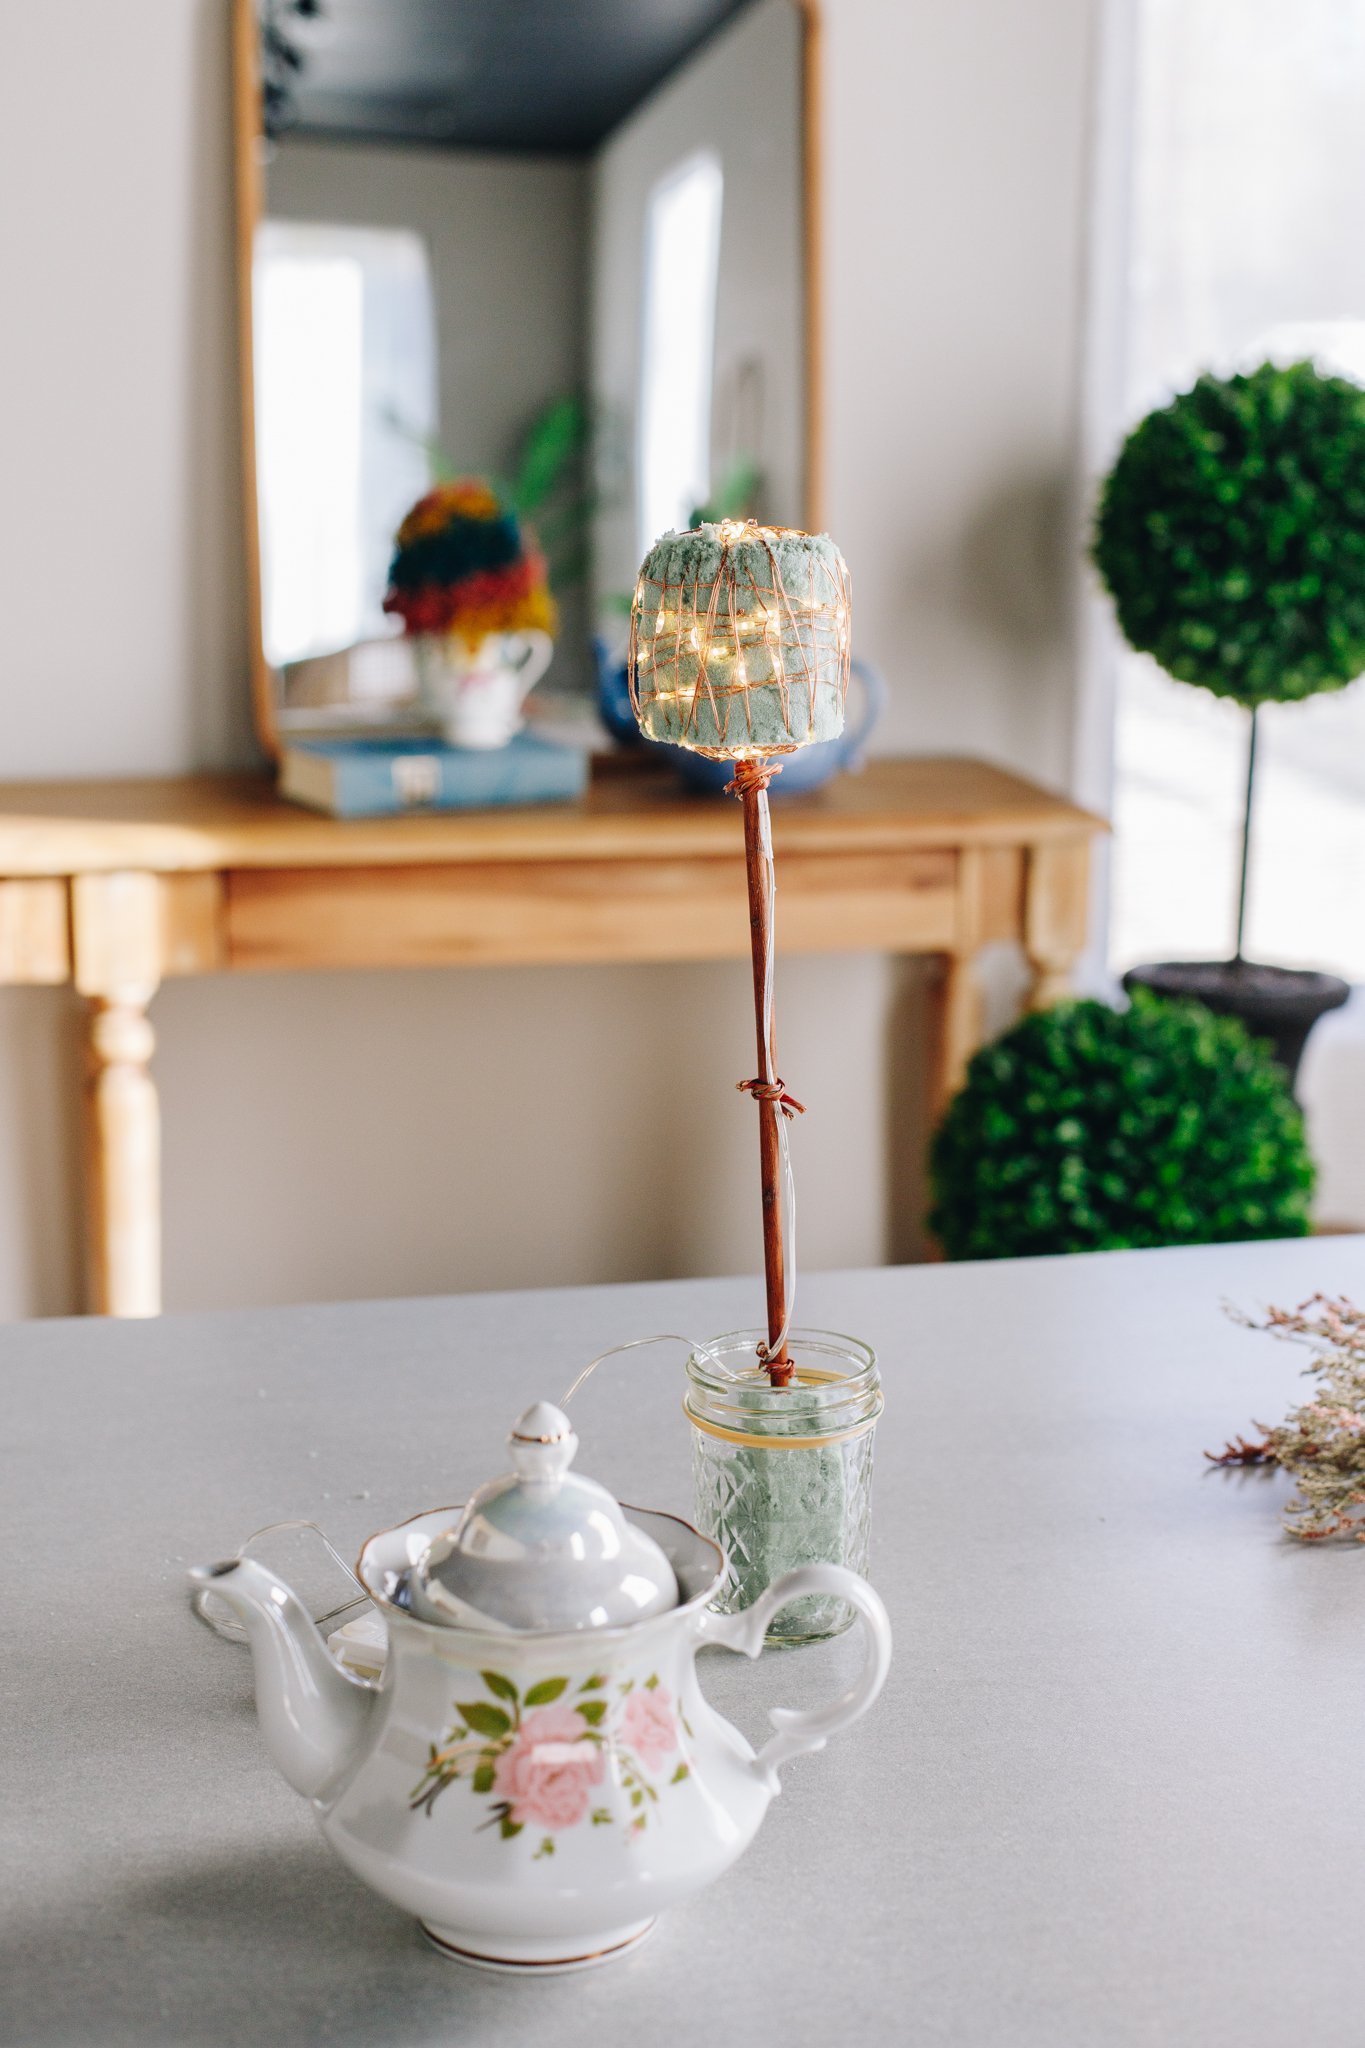 Make a Delightful Lighted Cloud Topiary out of Thrifted Finds for